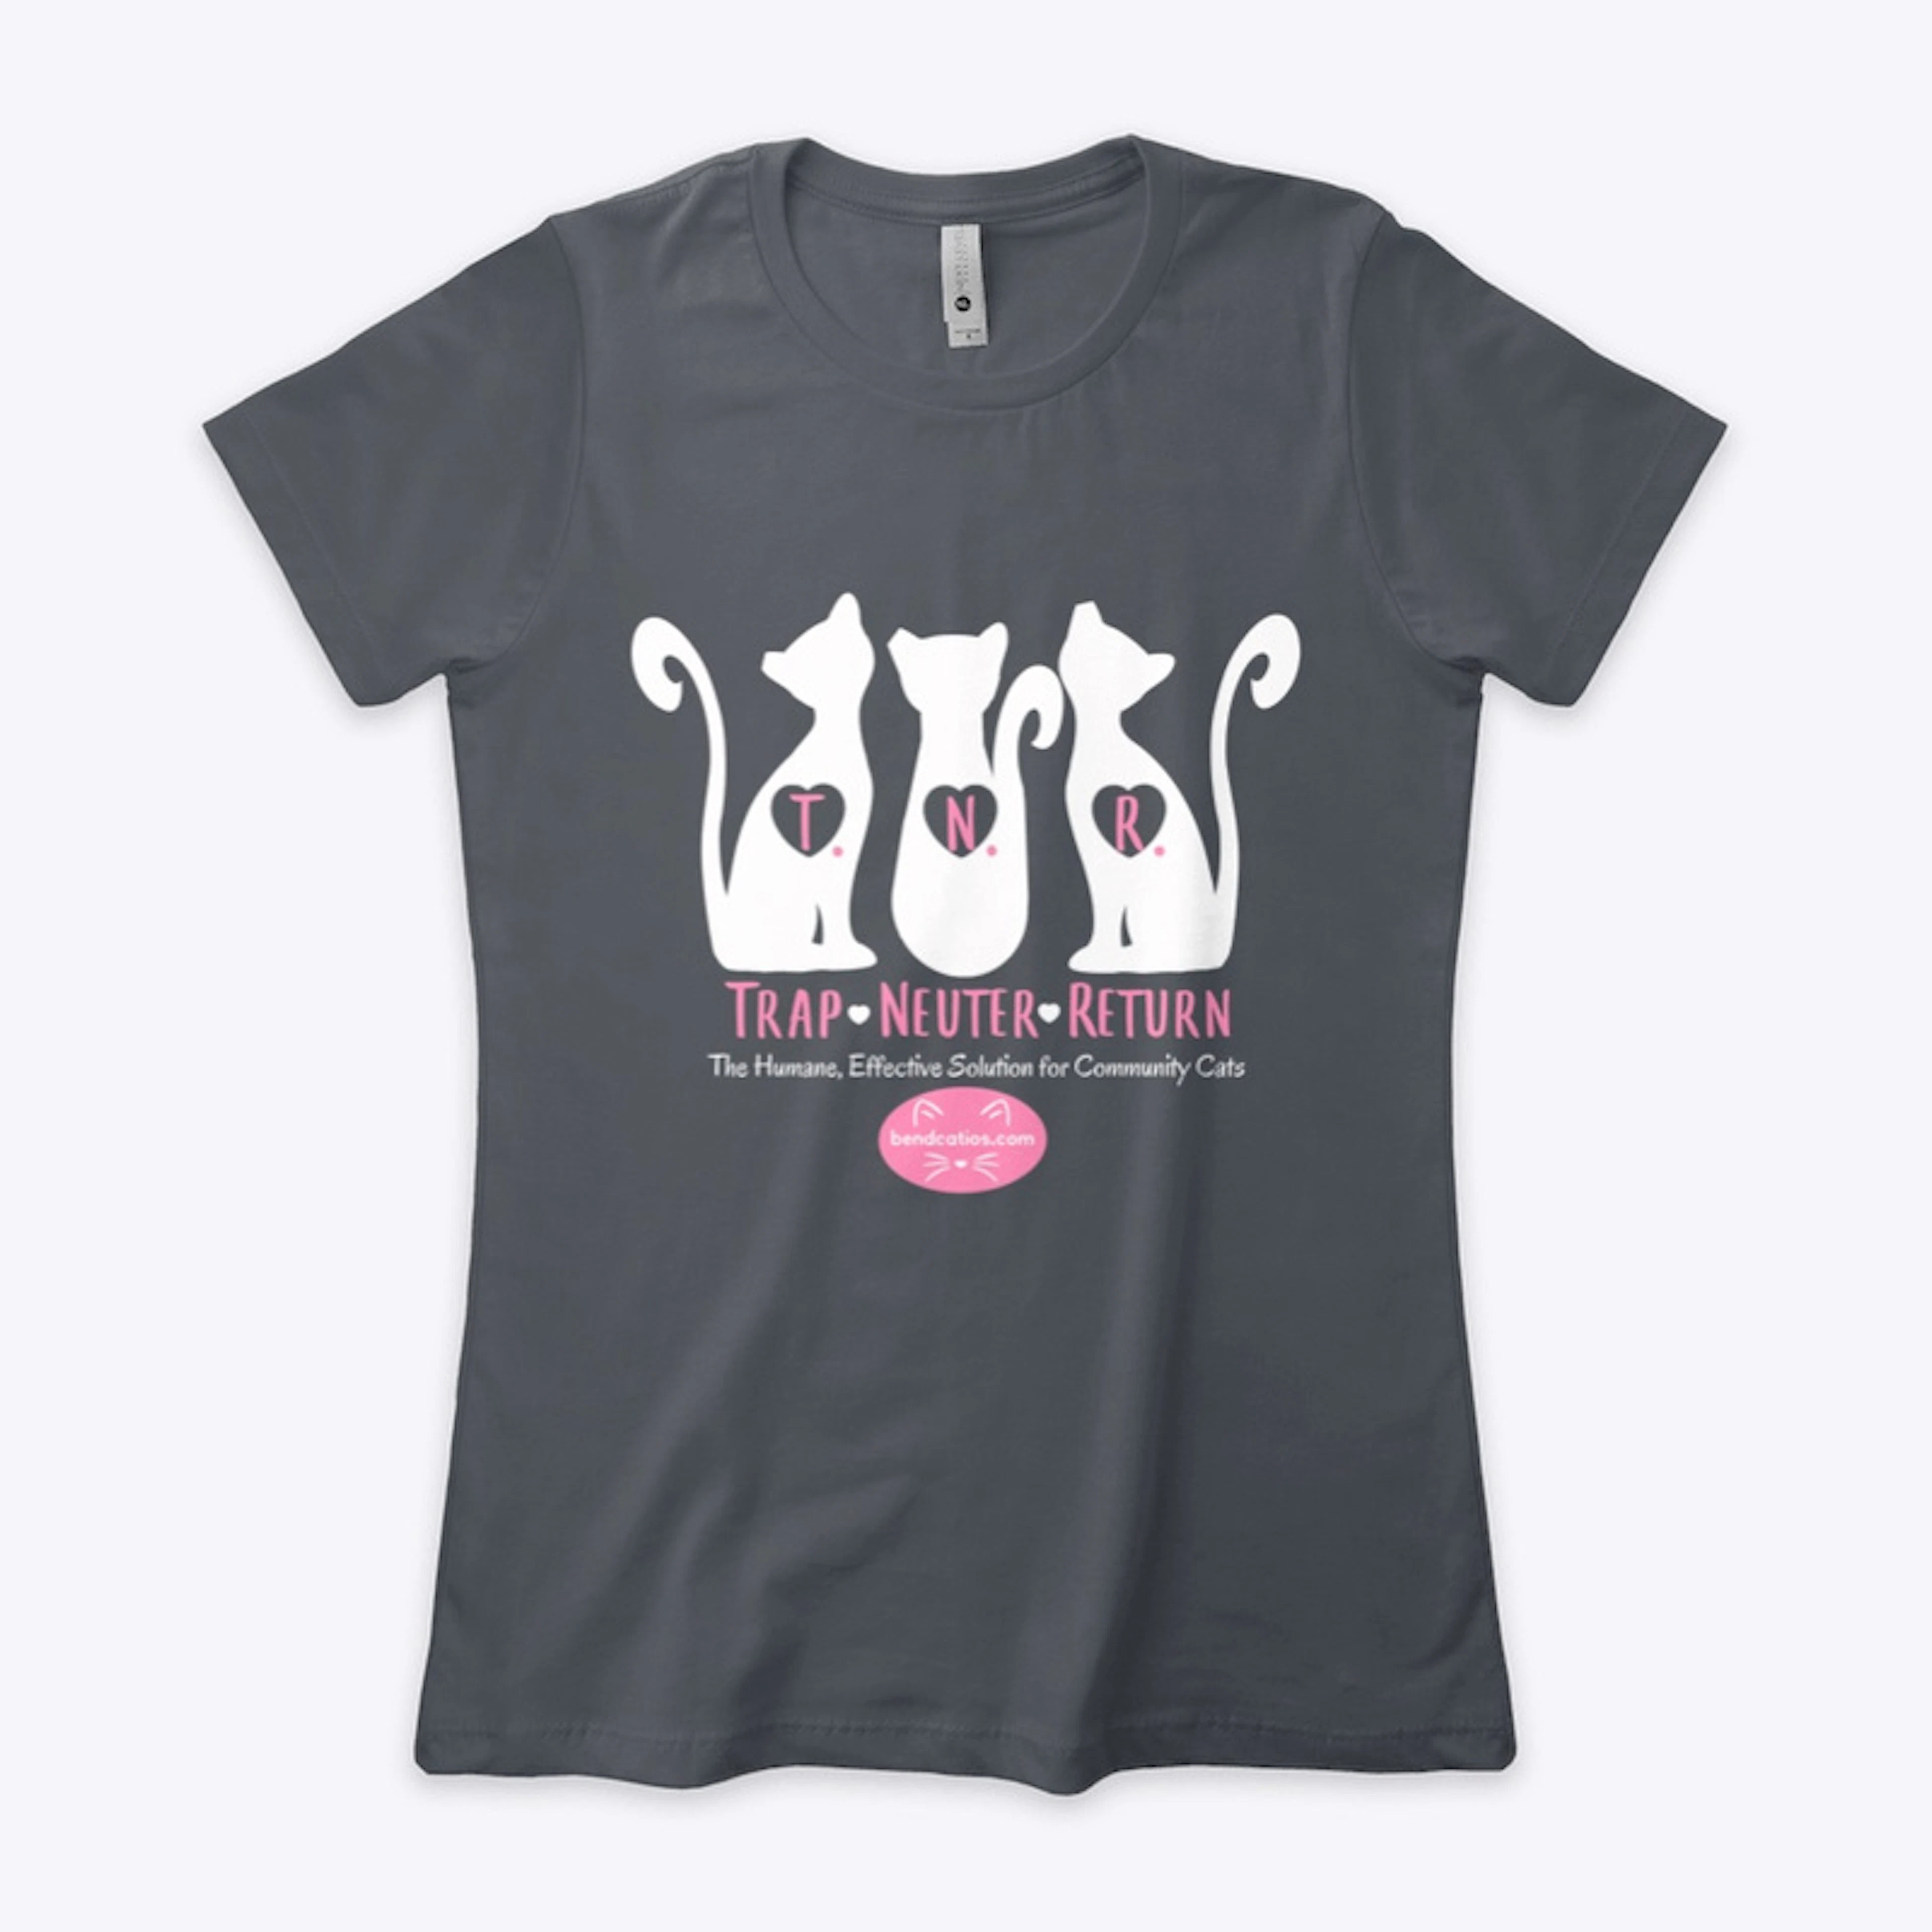 TNR The Humane Solution (pink lettering)